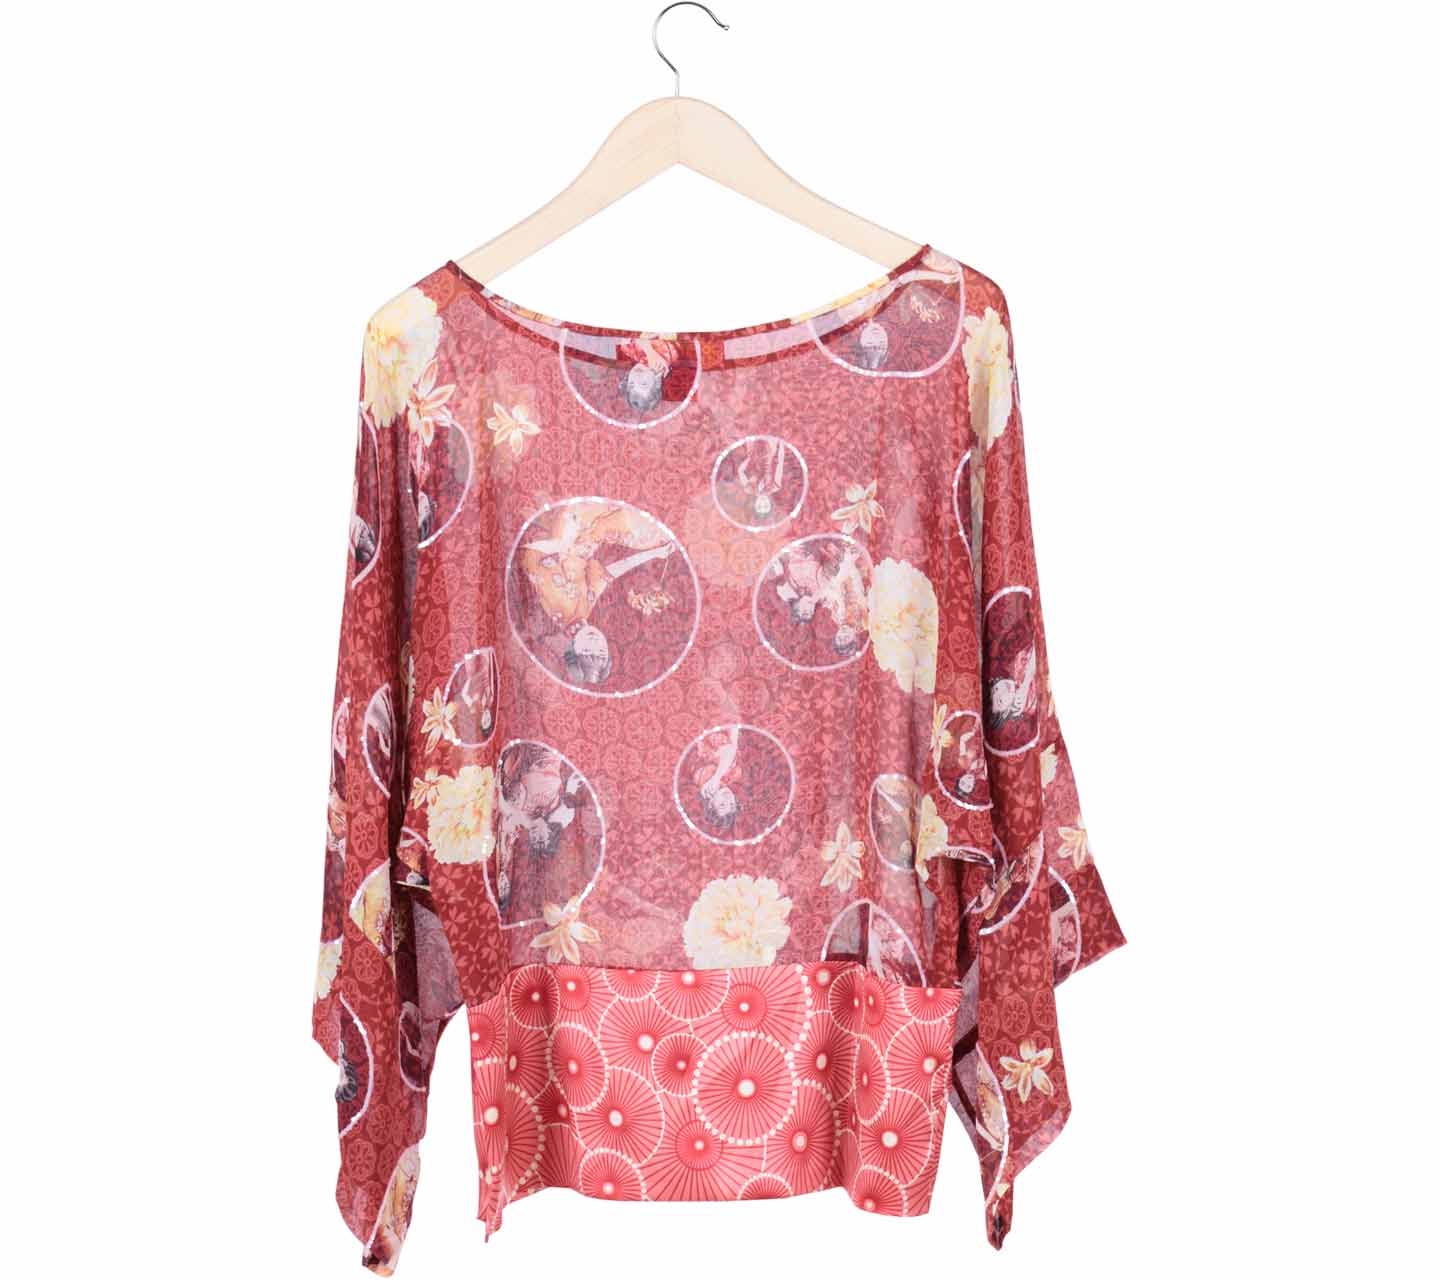 Shanghai Tang Red Patterned Silk Blouse